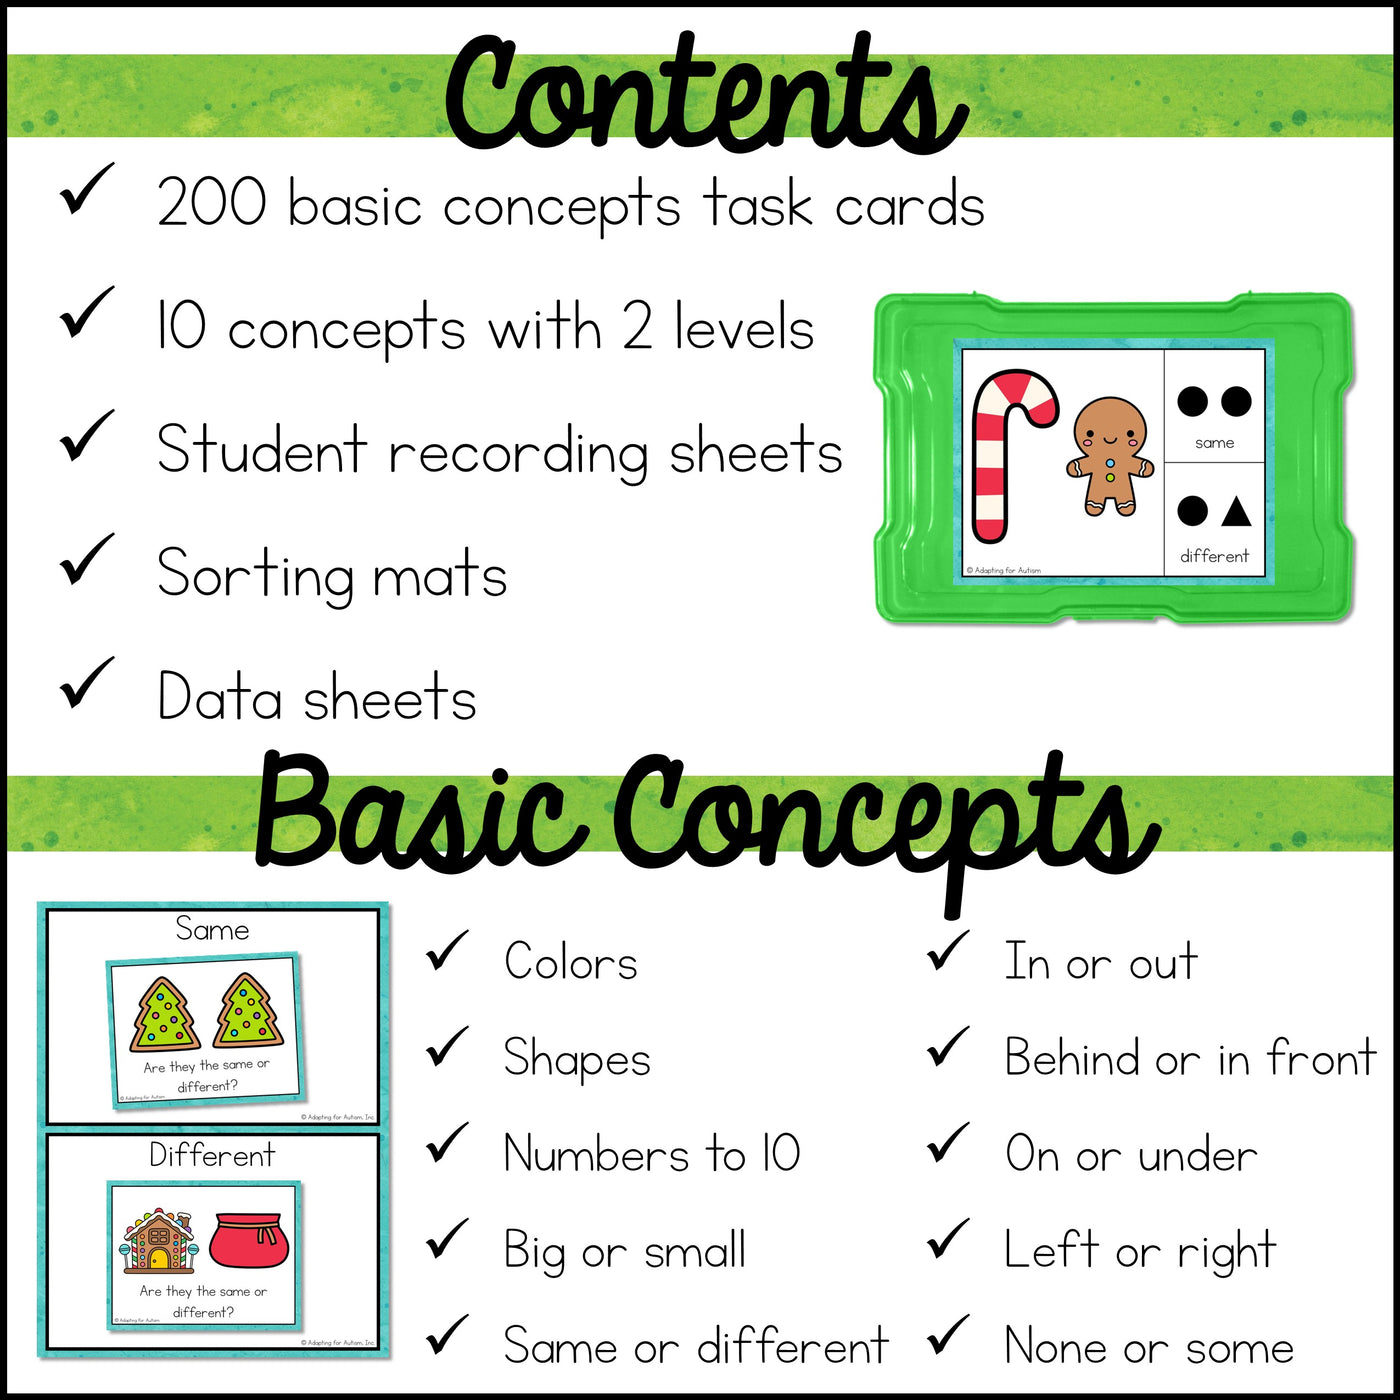 Special Education Task Boxes  Christmas Basic Concepts – Autism Work Tasks